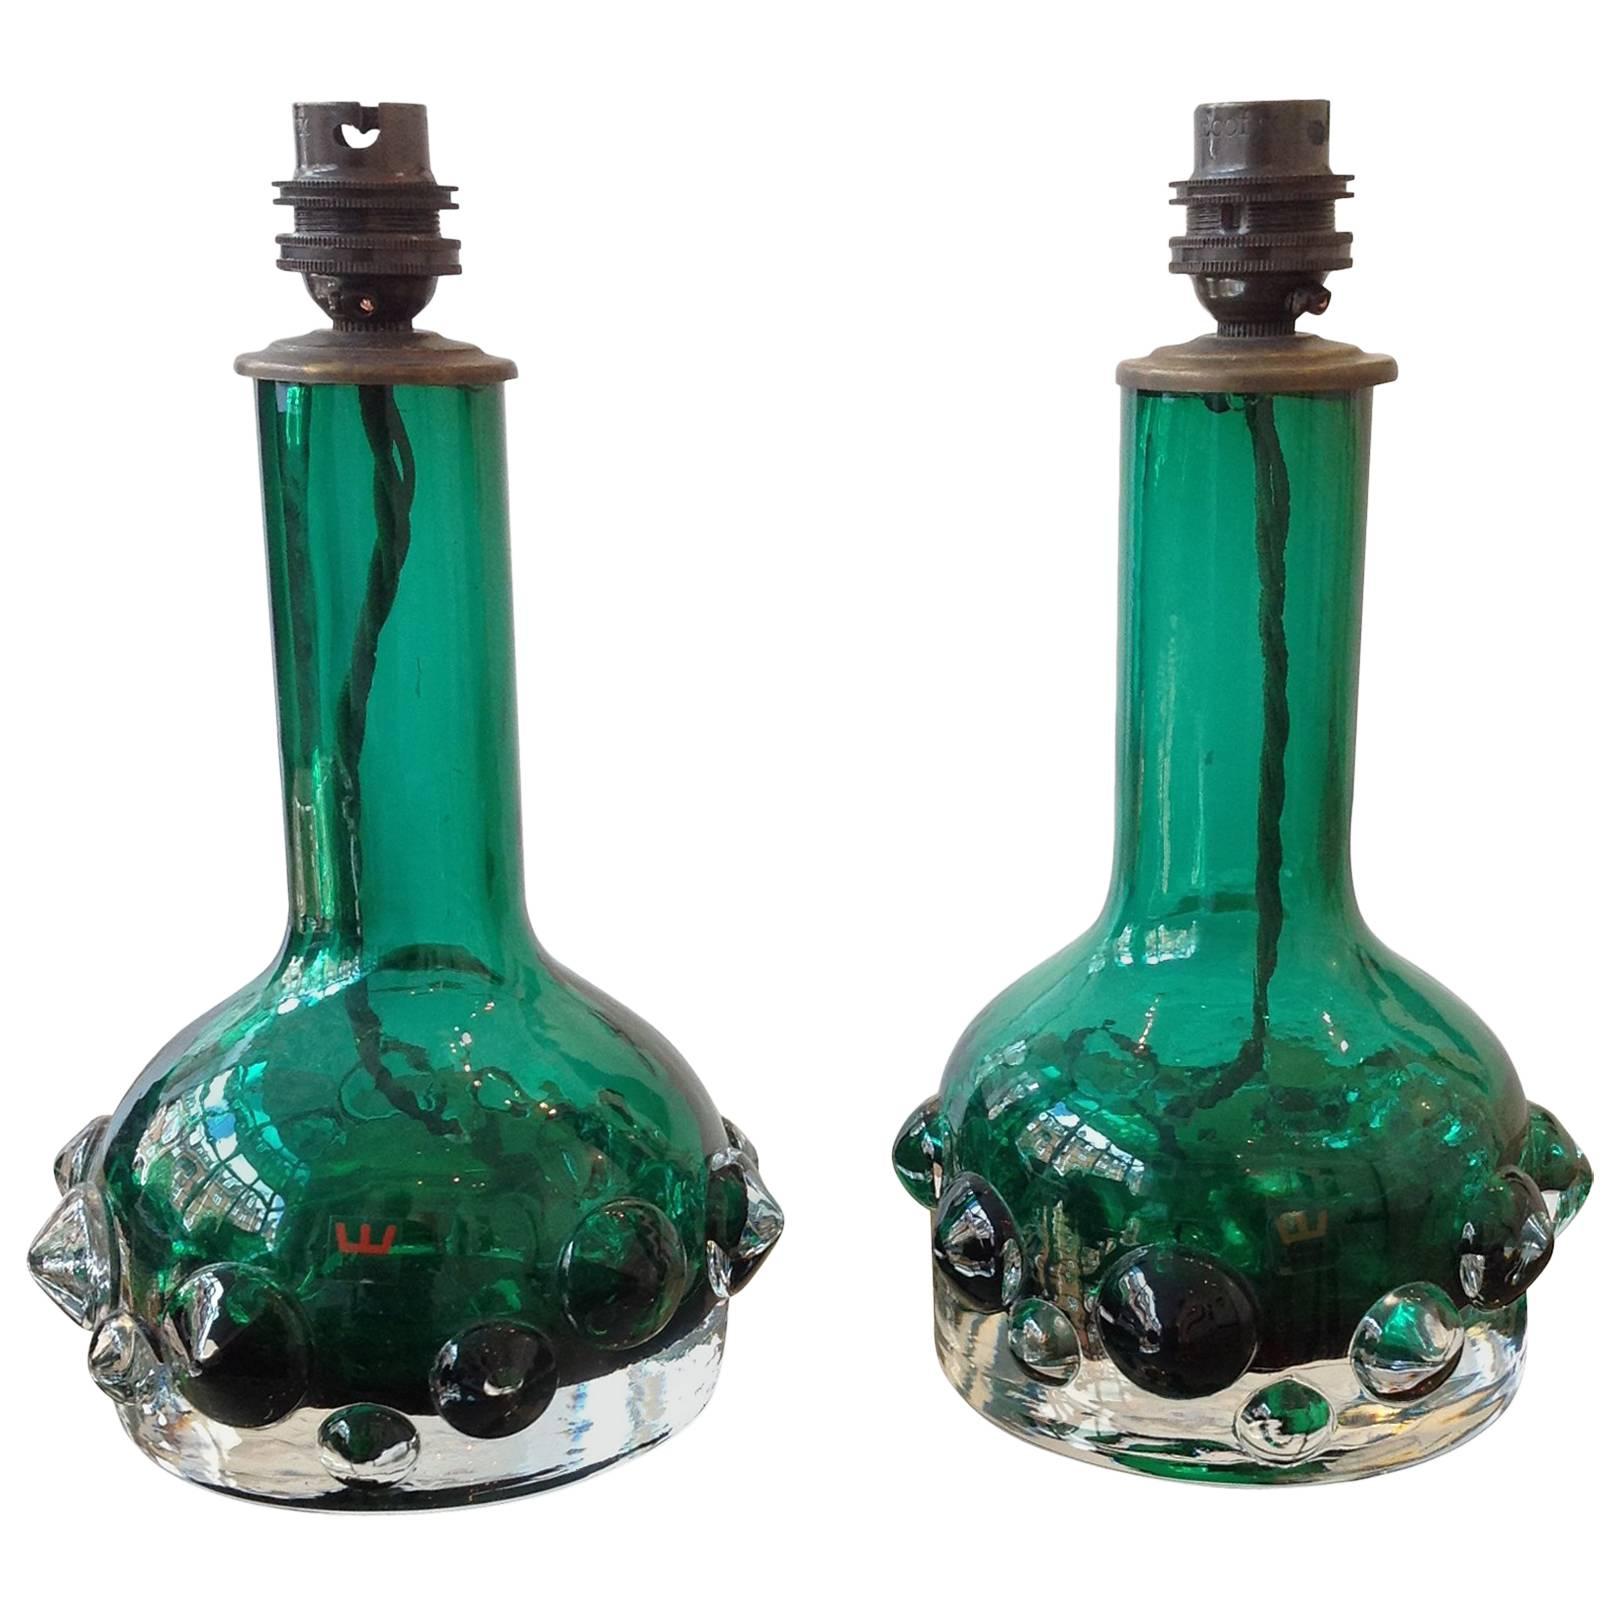 Pair of Green Kosta Glass Lamps